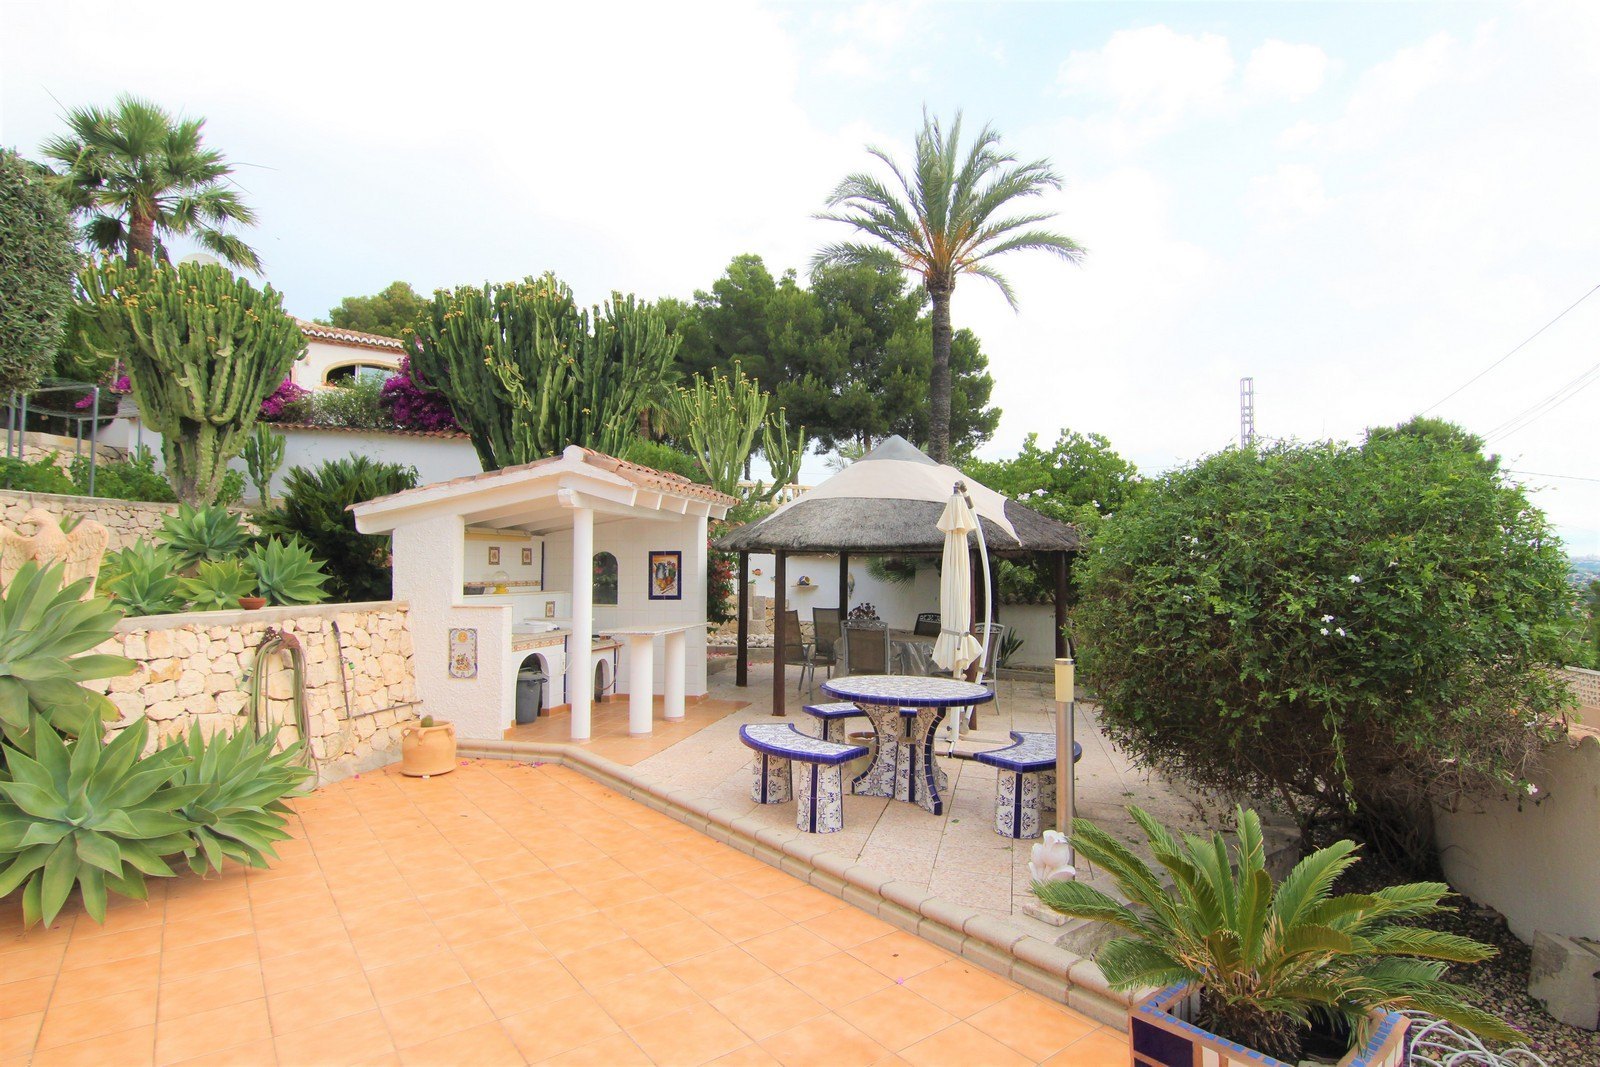 Villa for sale with two apartments and pool in Moraira.